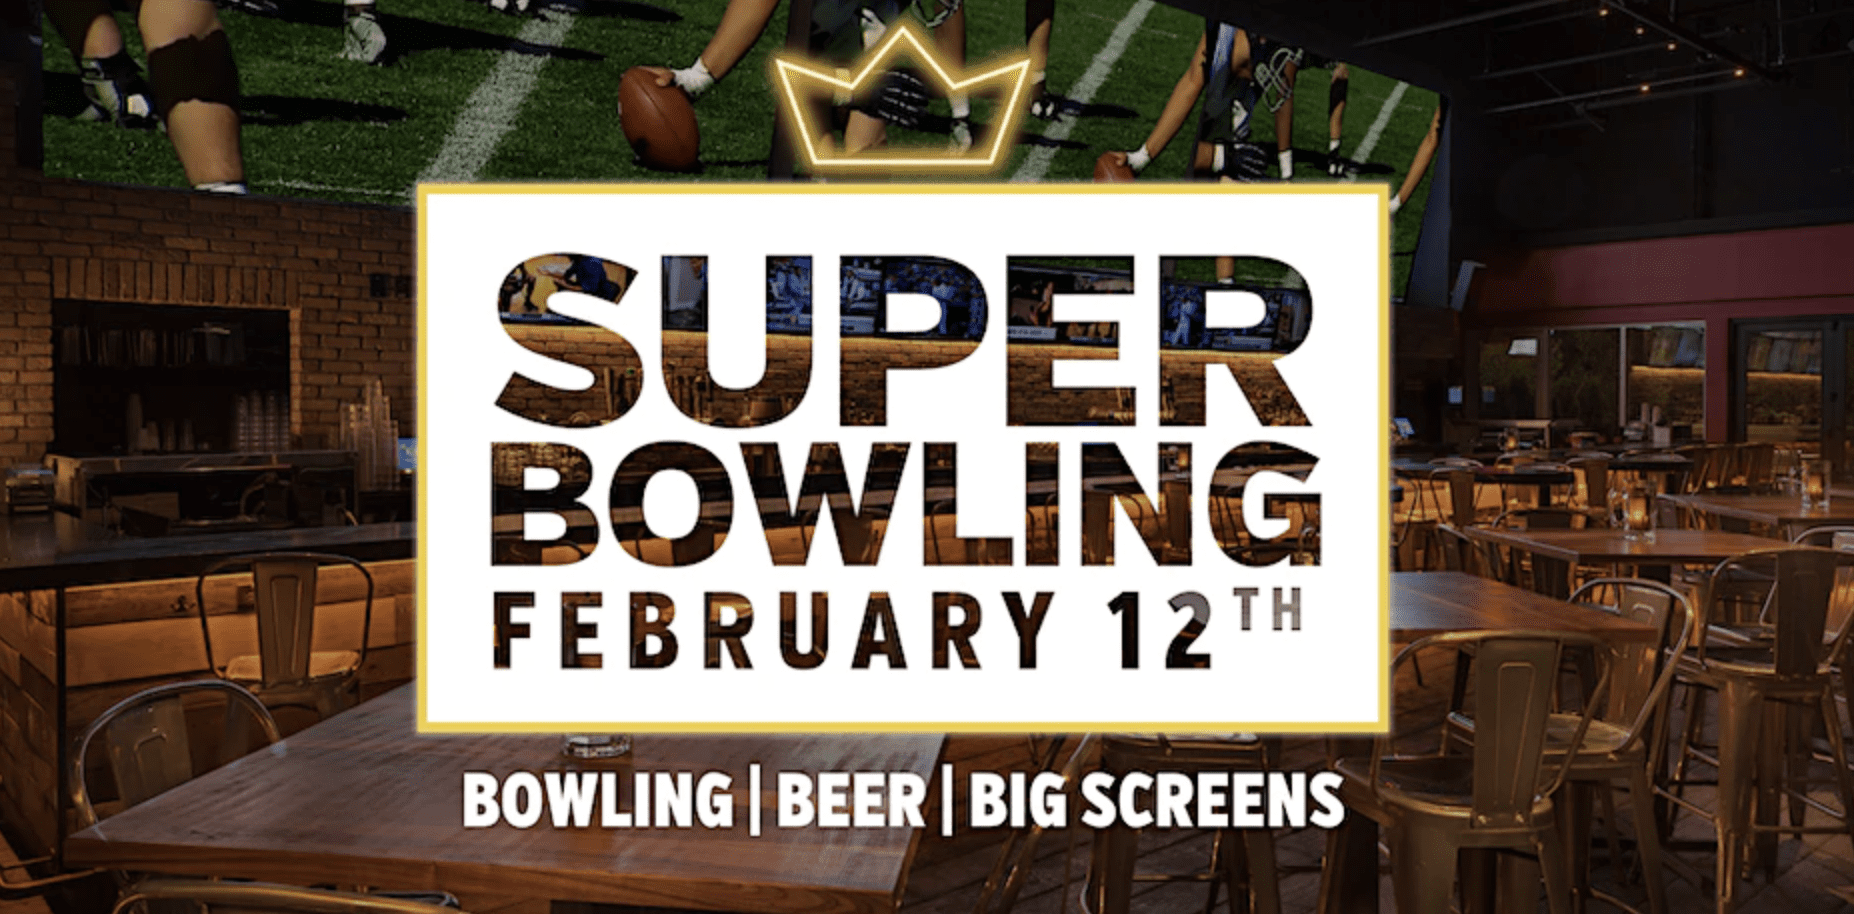 Super Bowling Party at KINGS Franklin, TN - Super Bowl Event.